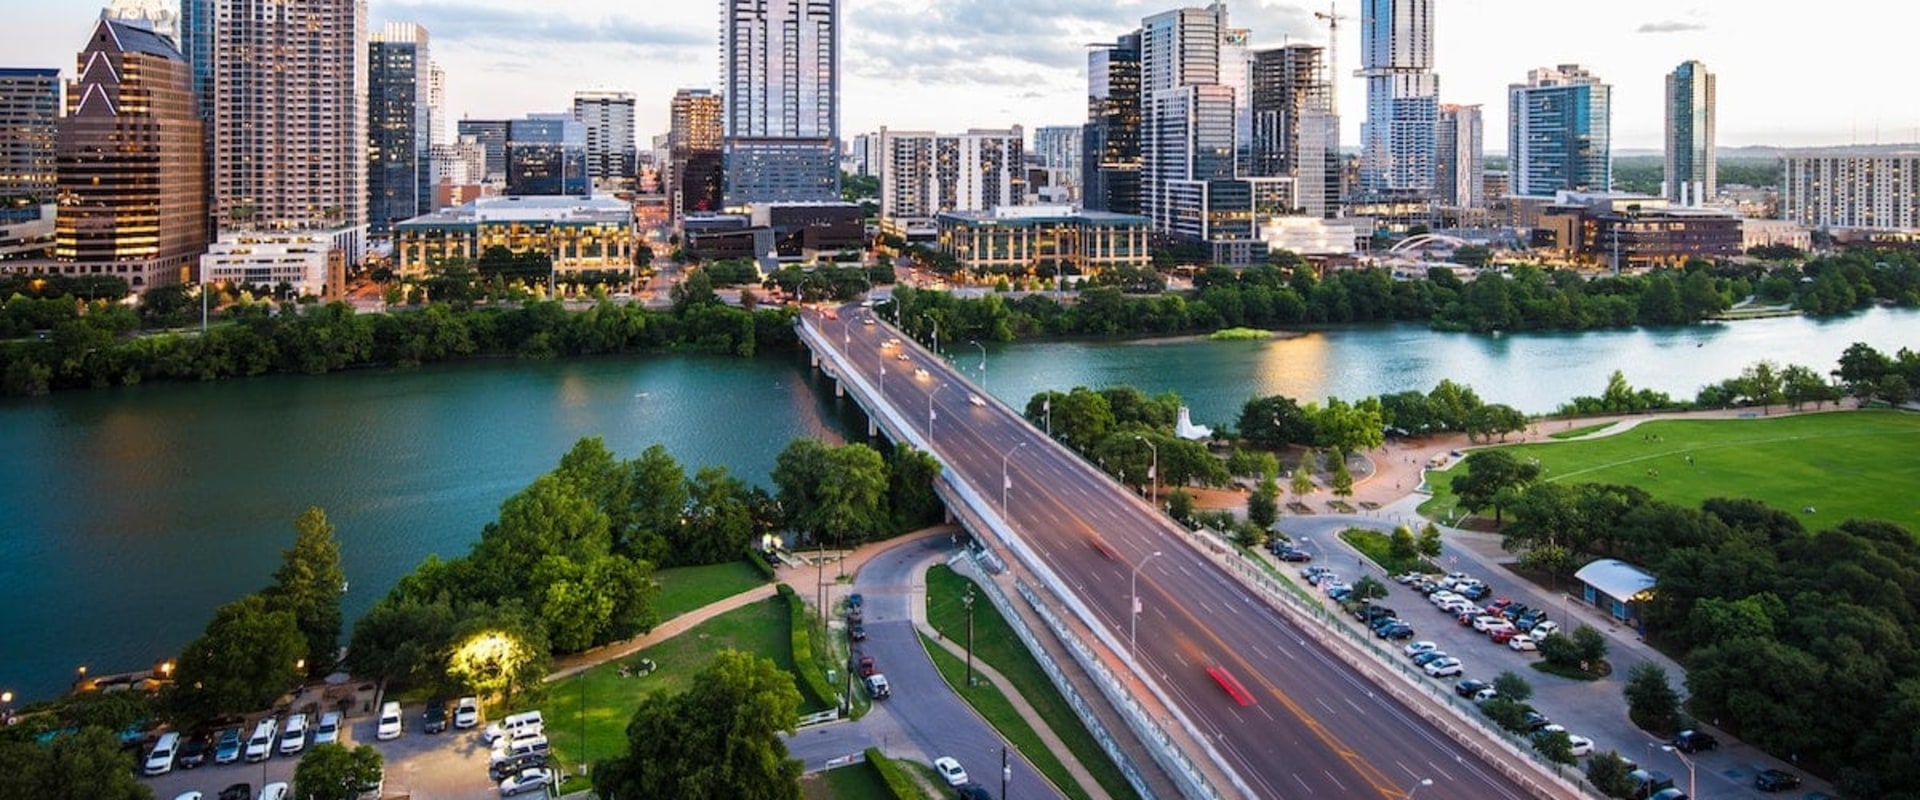 What makes austin so special?